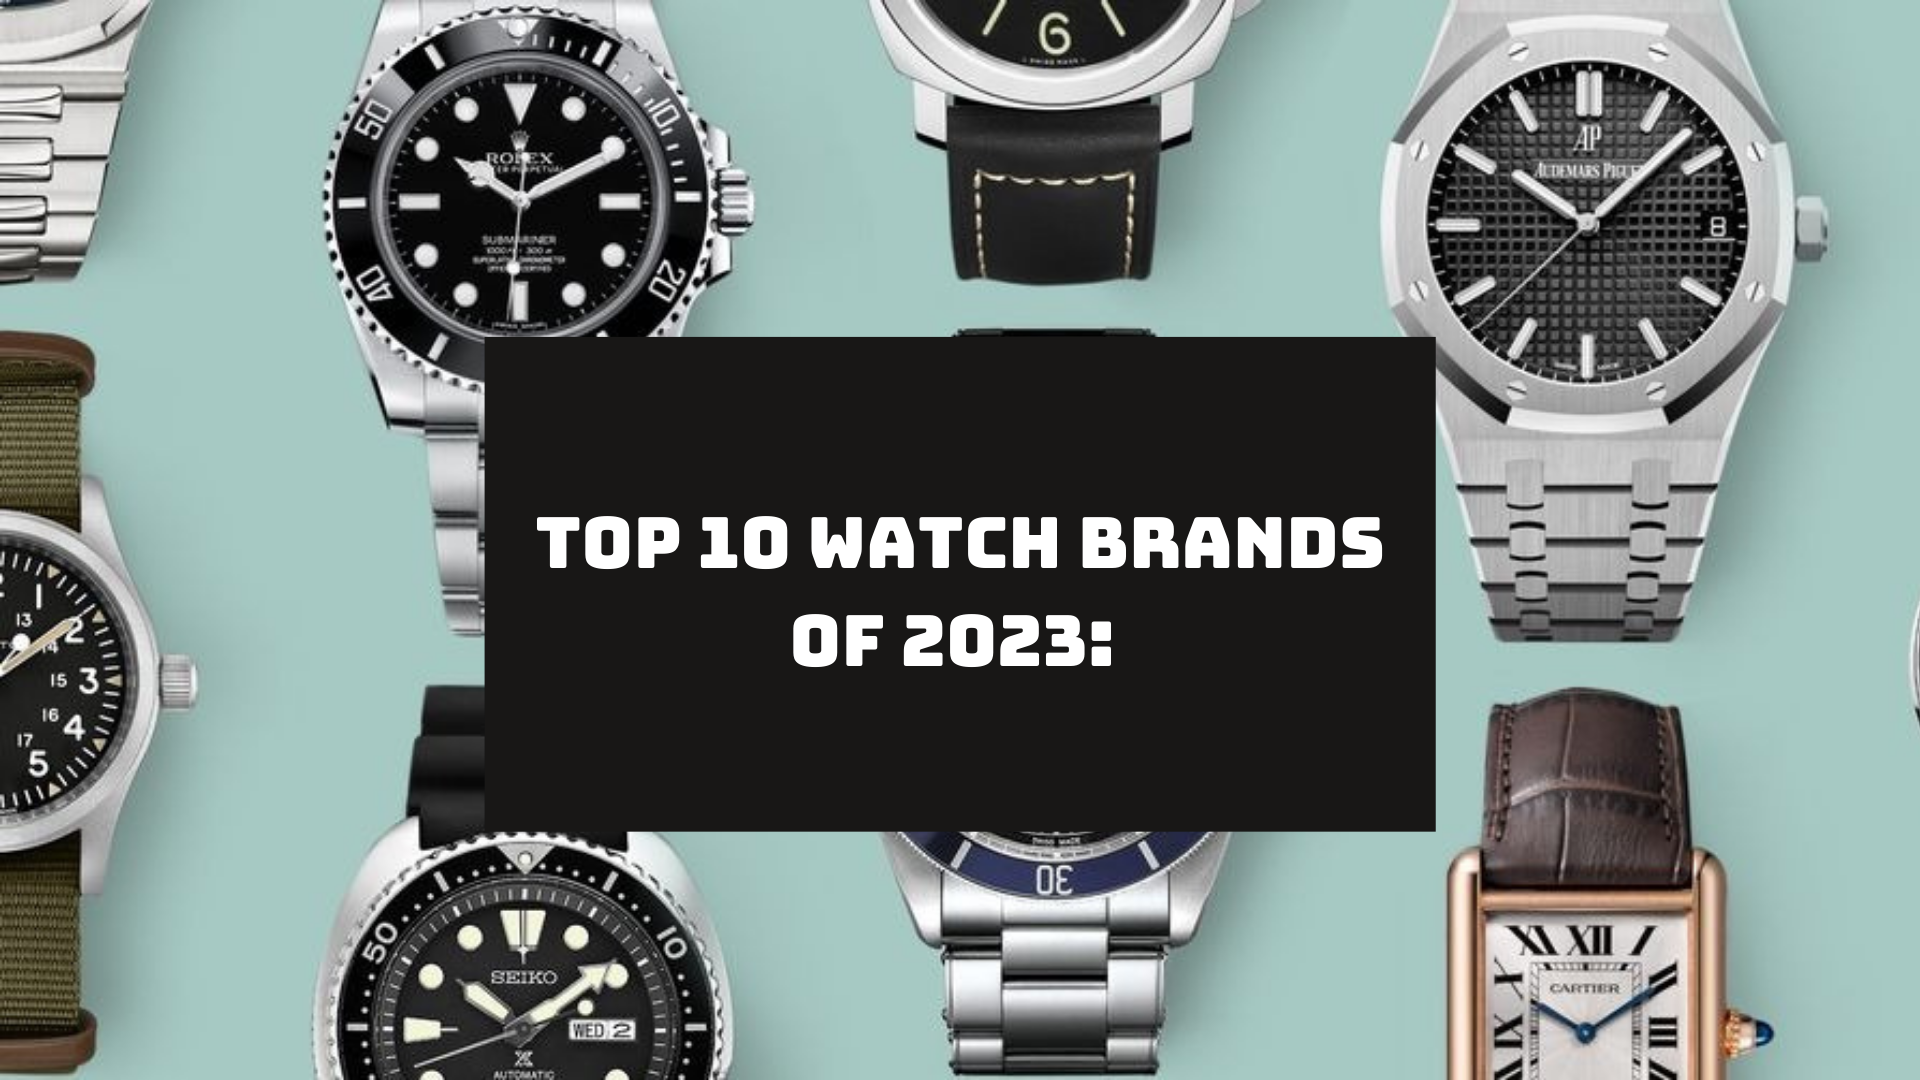 Where does the name of your favorite watch brands come from